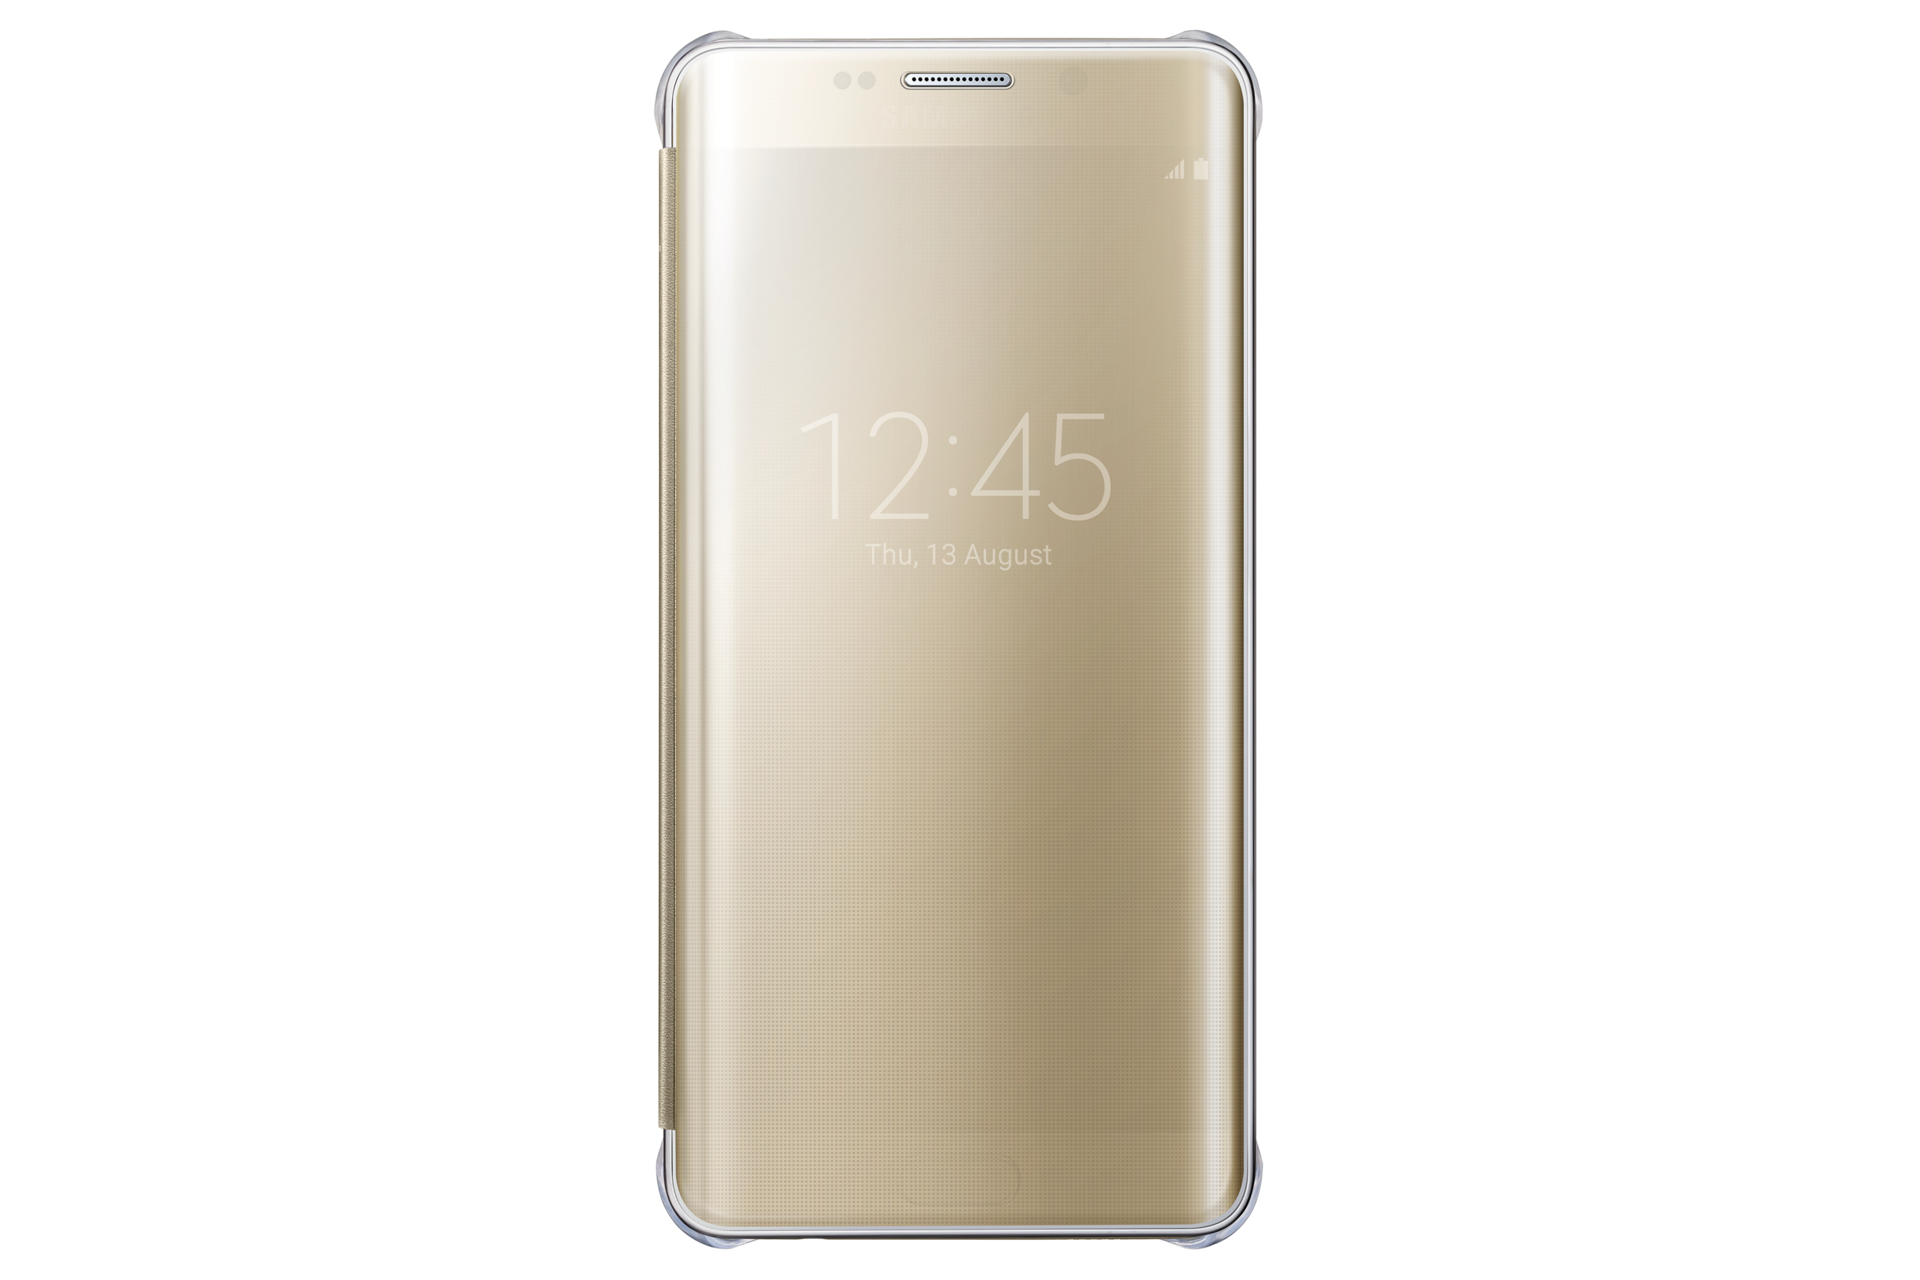 Zakenman Luxe Ontrouw Clear View Cover Galaxy S6 edge+ | Samsung Service NL